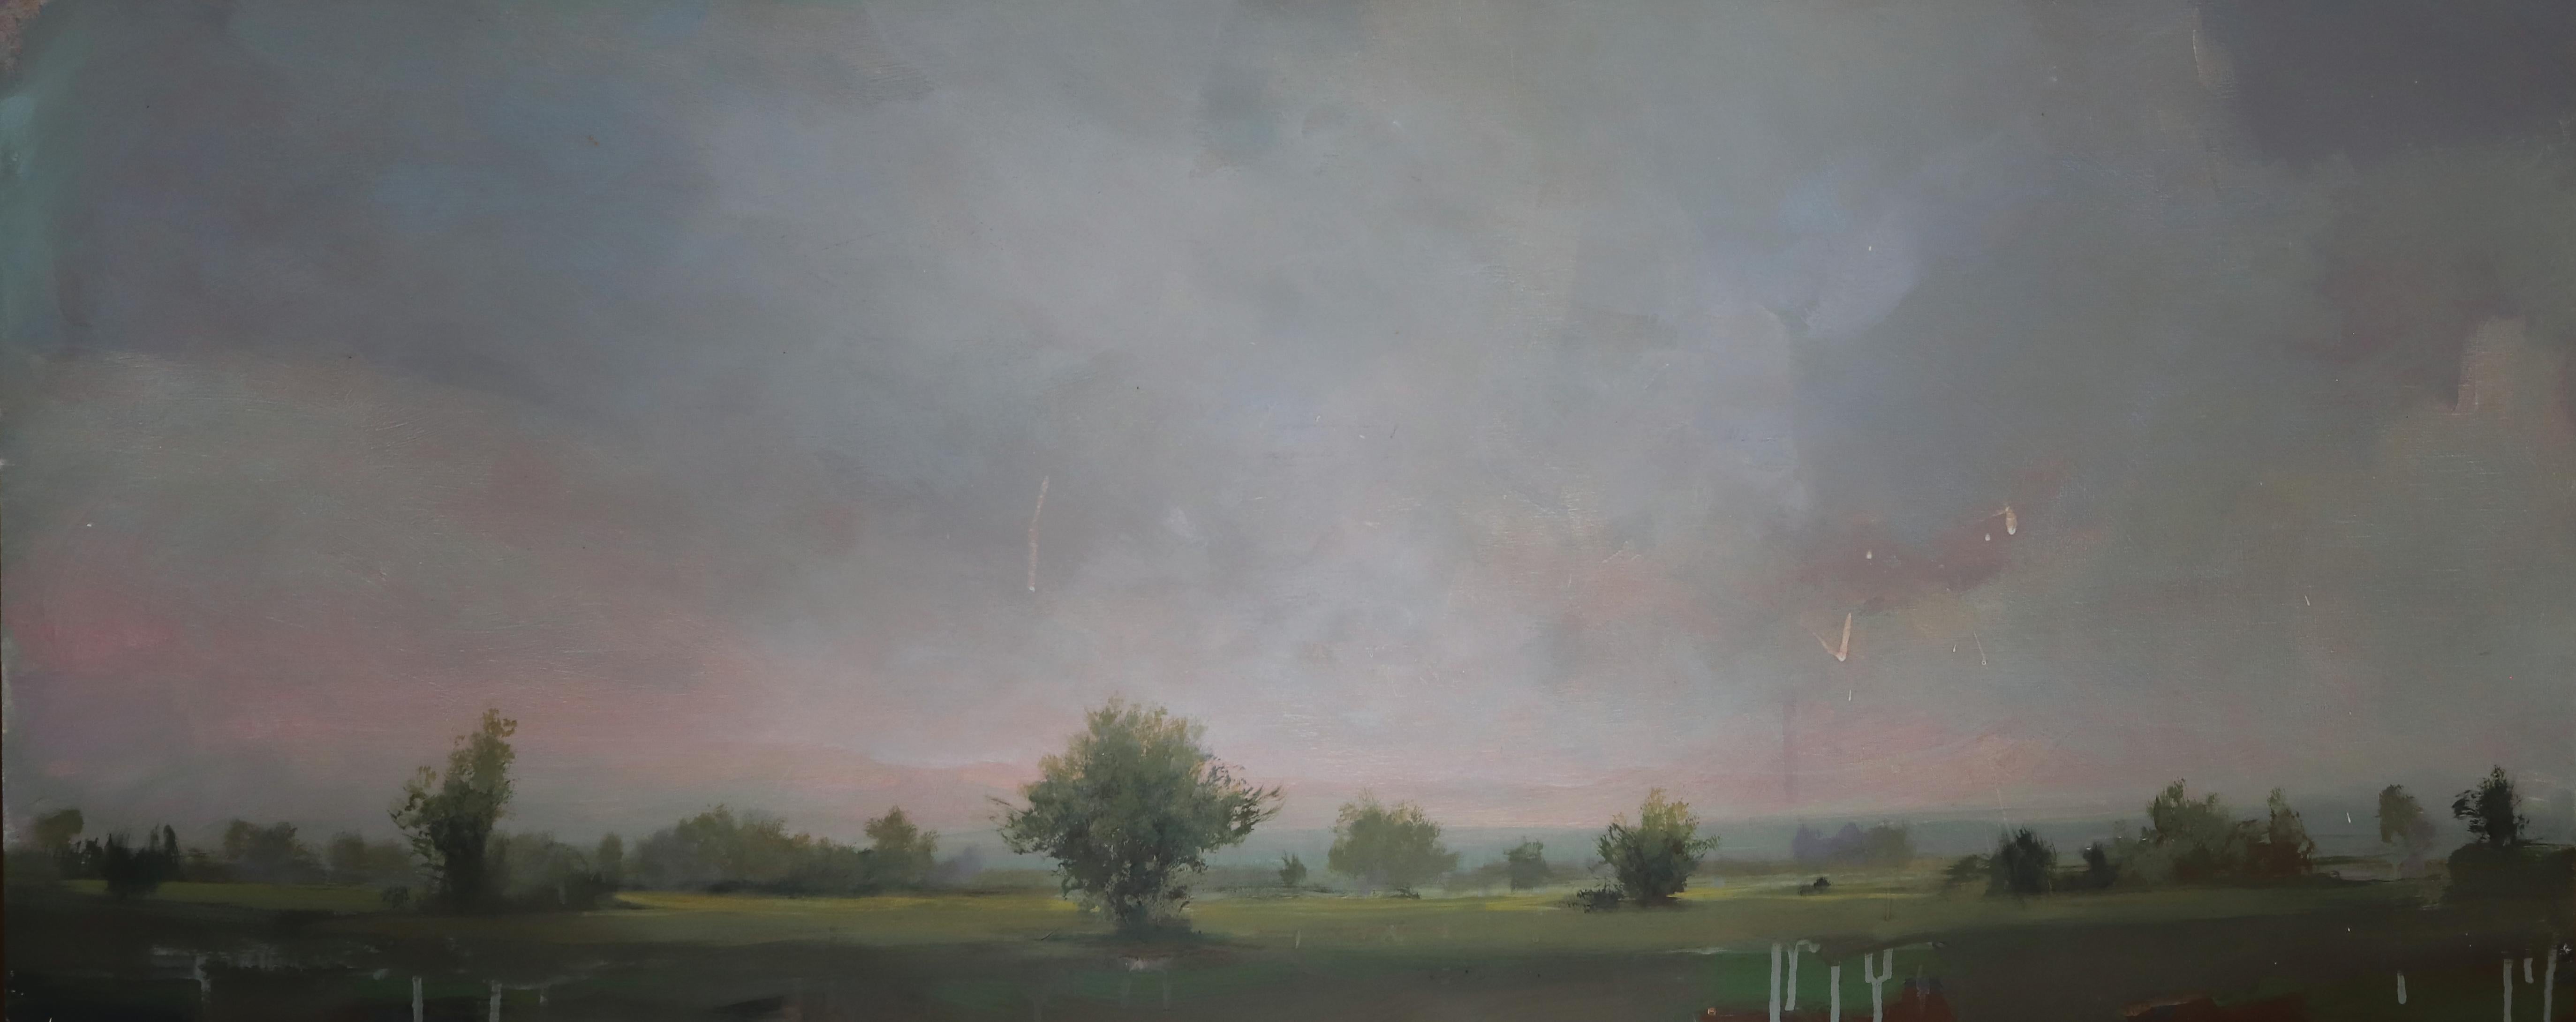 Peter Hoffer
Cote, 2019
20 x 48 in.
acrylic, oil, and resin on panel

This original landscape painting on panel by Peter Hoffer is simultaneously contemporary and traditional, with a glistening surface of thick resin over dripping, painterly